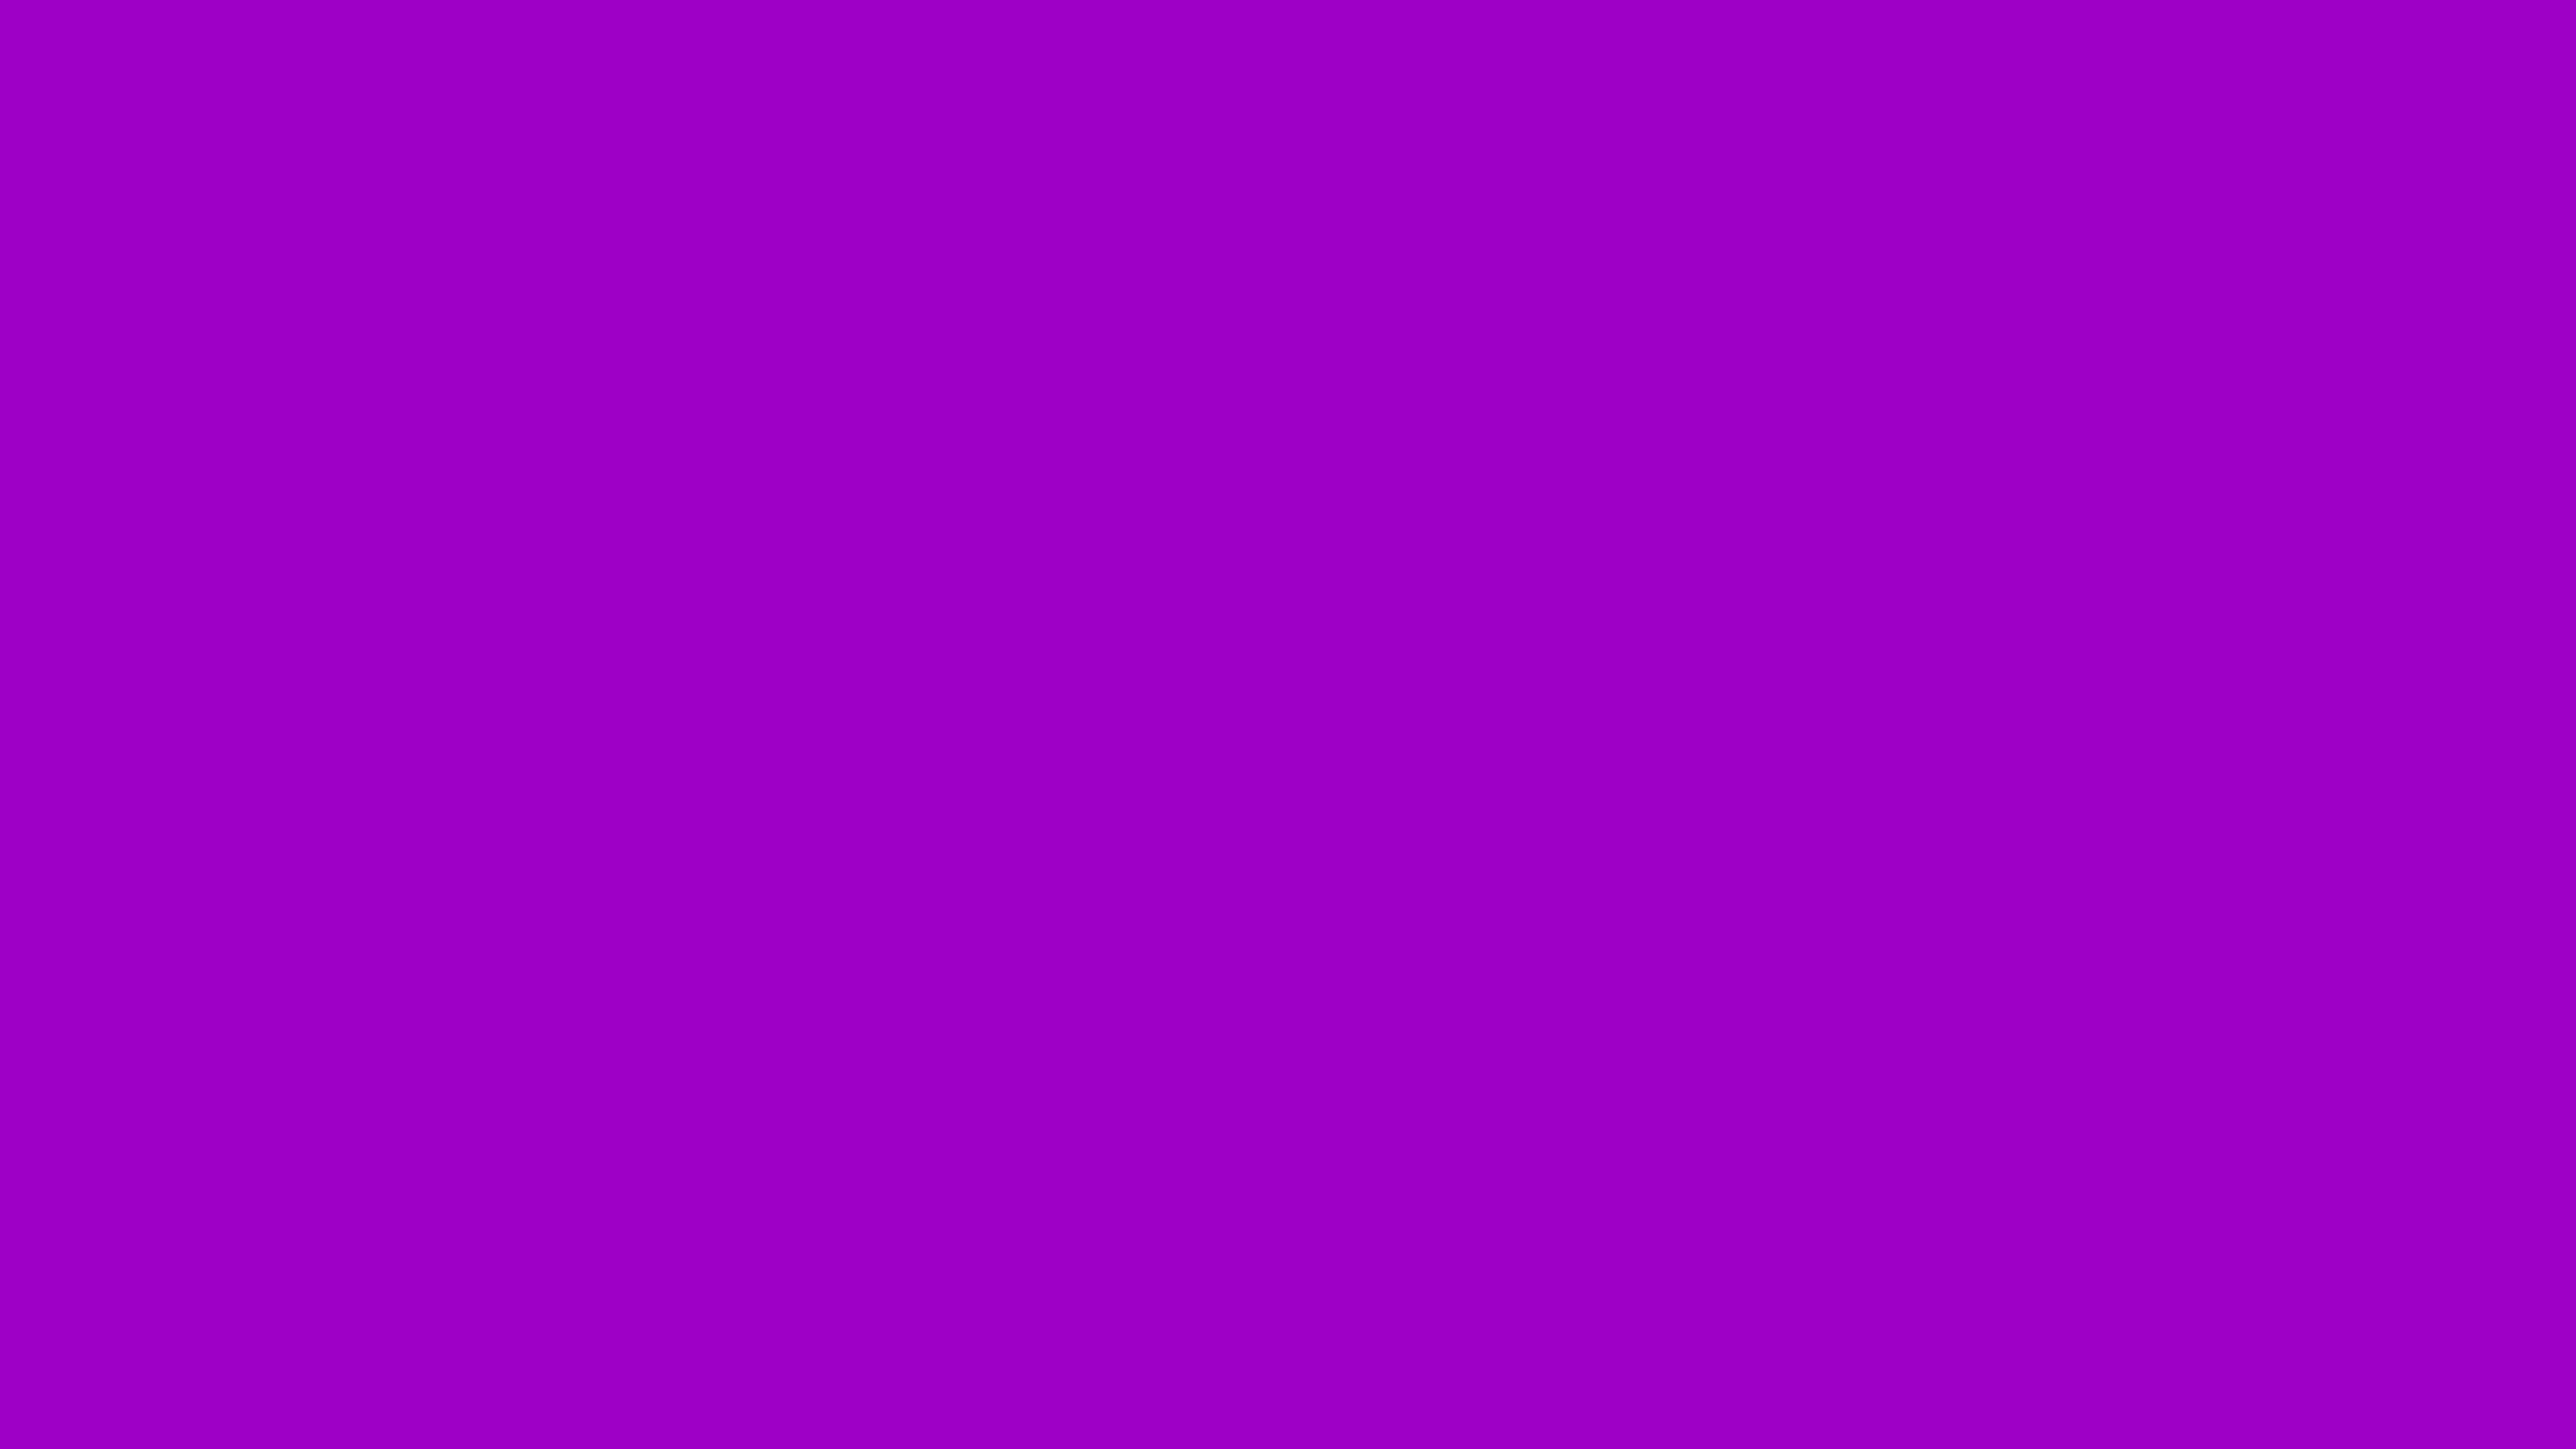 7680x4320 Purple Munsell Solid Color Background